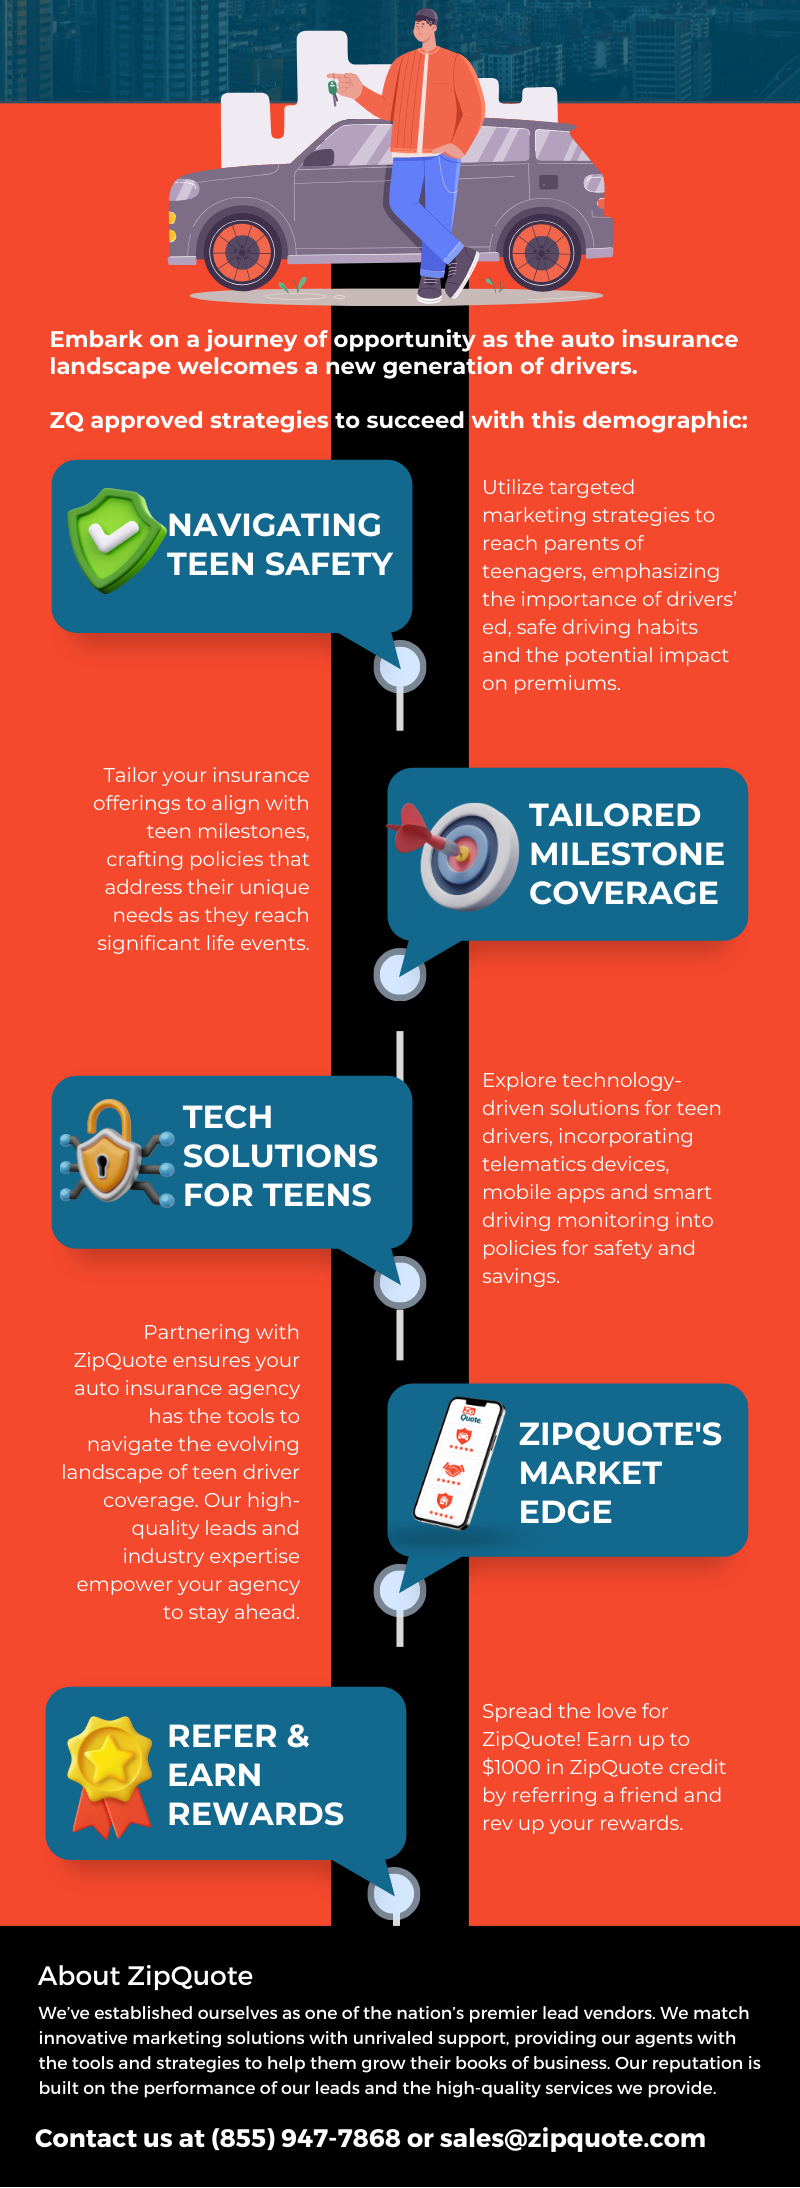 3 Tips For Successfully Insuring Teen Drivers by ZipQuote